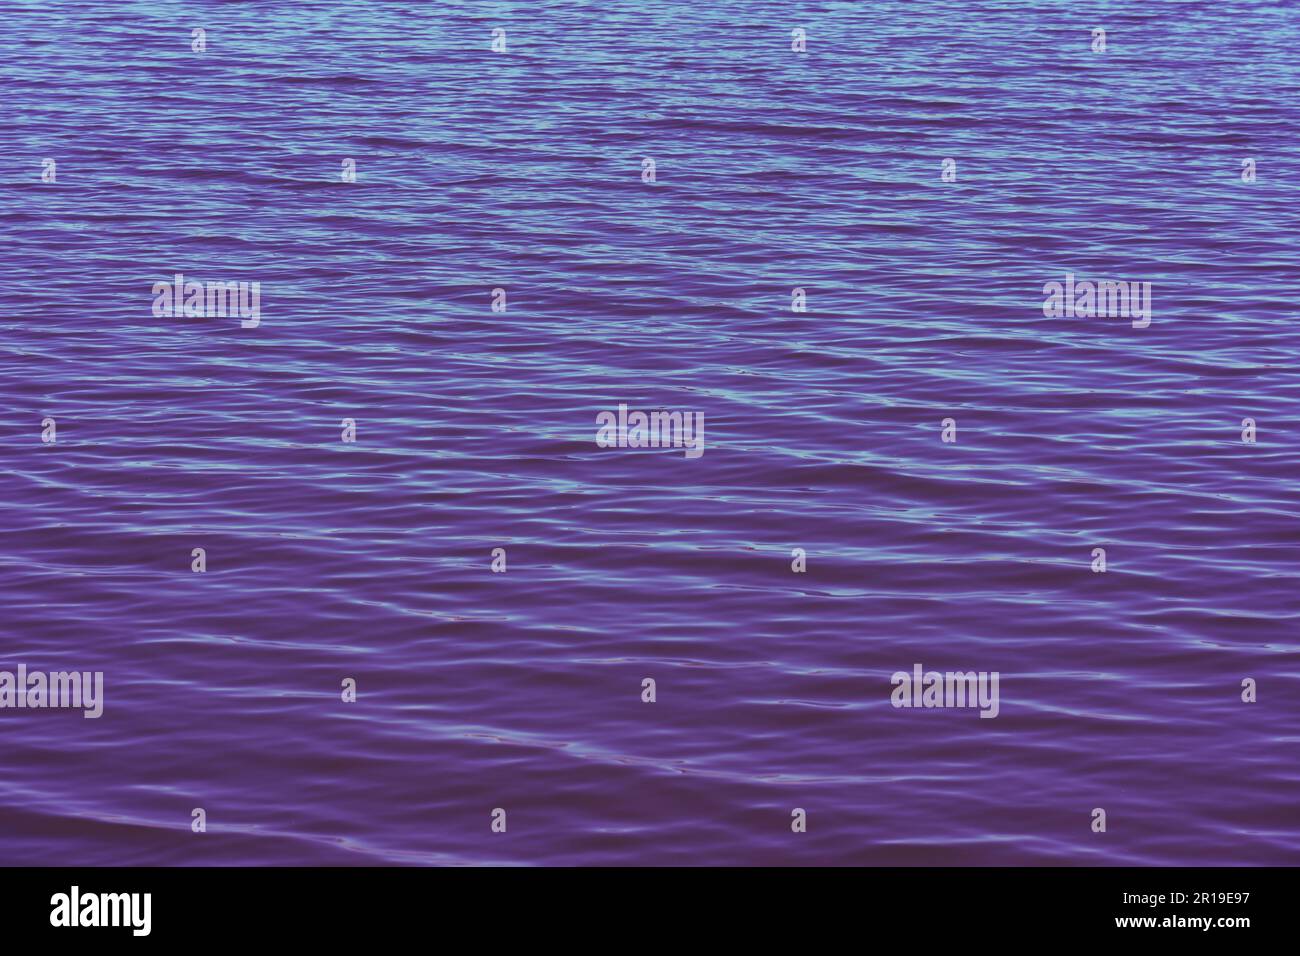 Blue purple water in wavy ripples with smooth surface look of calm and quiet  on  a lake or sea. This scene is peaceful and appears never ending. Stock Photo